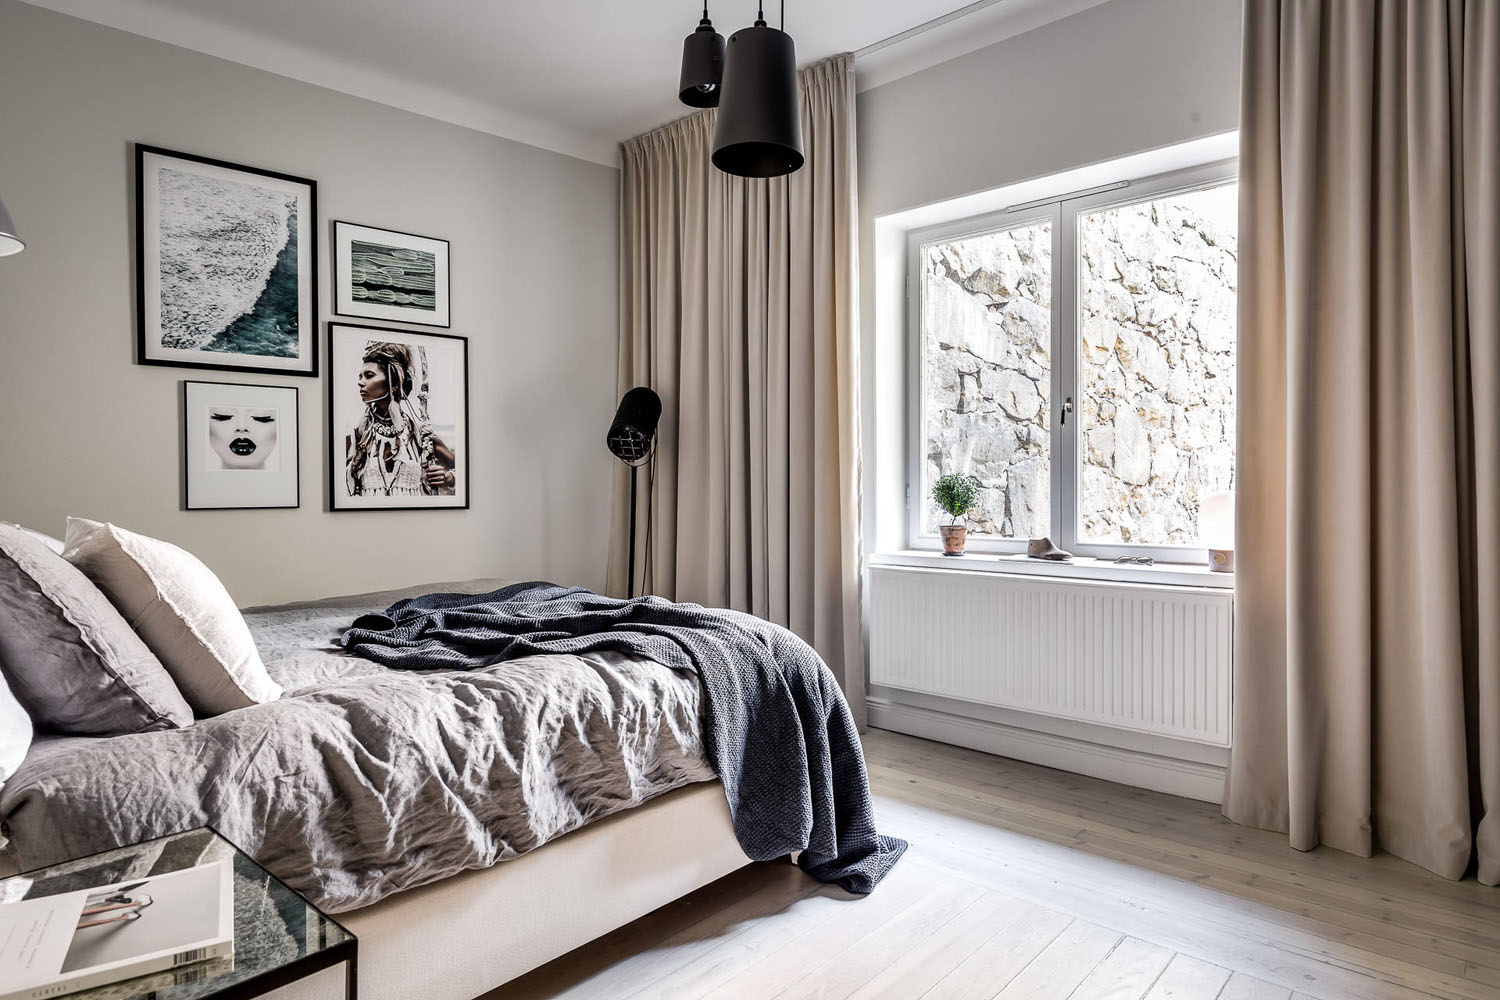 apartment contemporary luxurious layout bedroom planned well sweden idesignarch decorating interior architecture